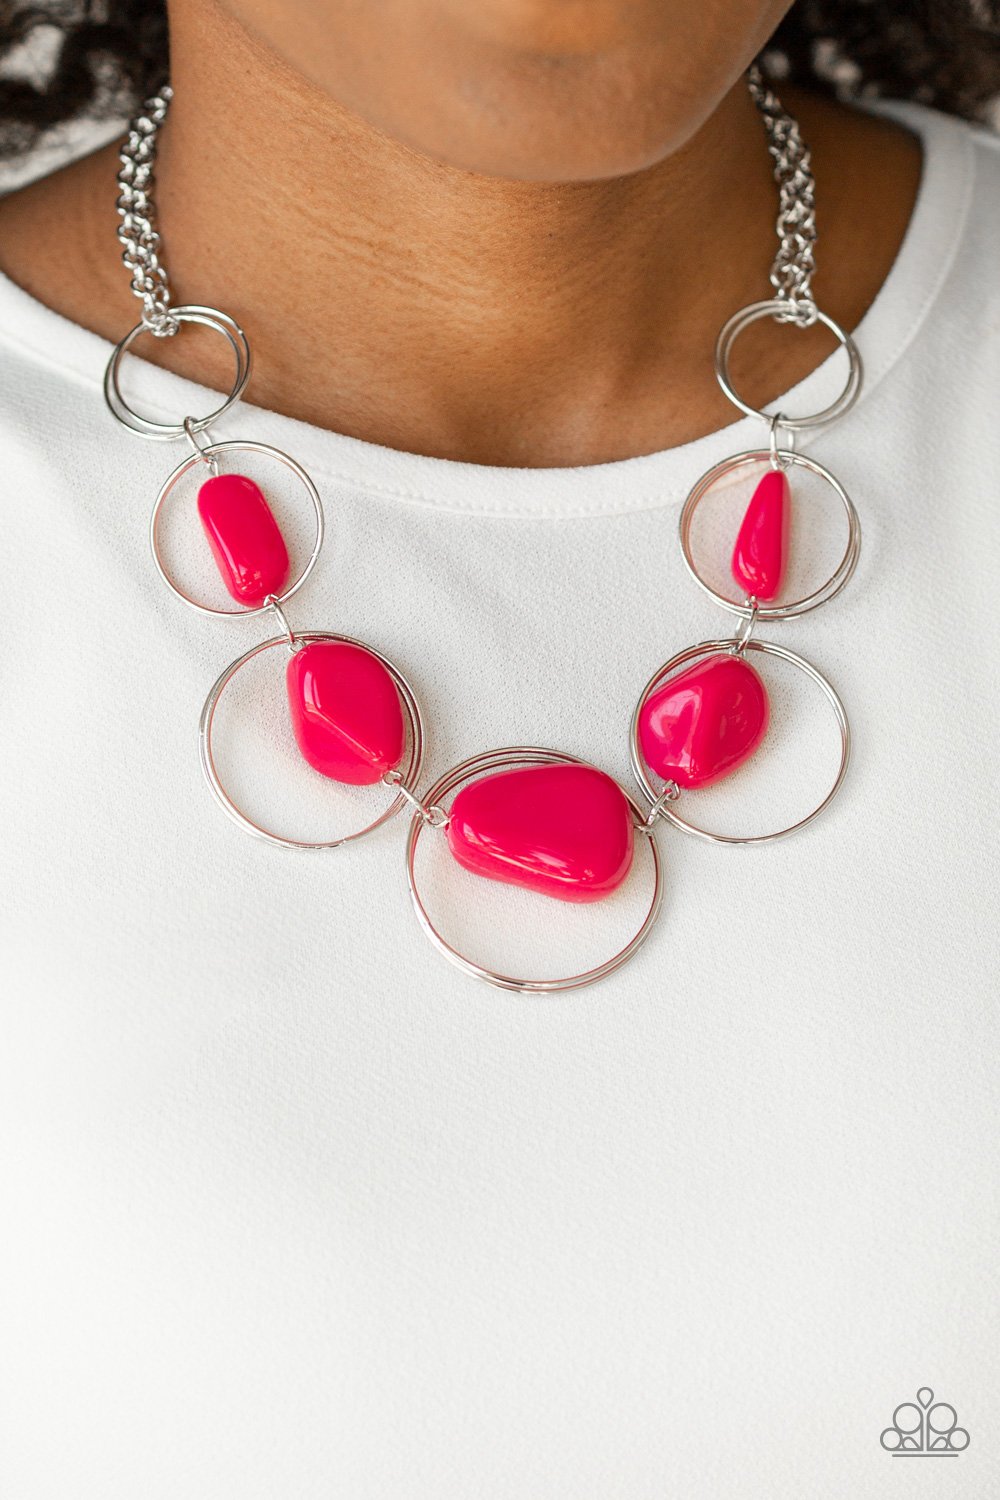 Travel Log - Pink and Silver Fashion Necklace - Paparazzi Accessories - Faux pink rock beads, silver hoops gradually increase in size as they link below the collar for a trendy fashion necklace.